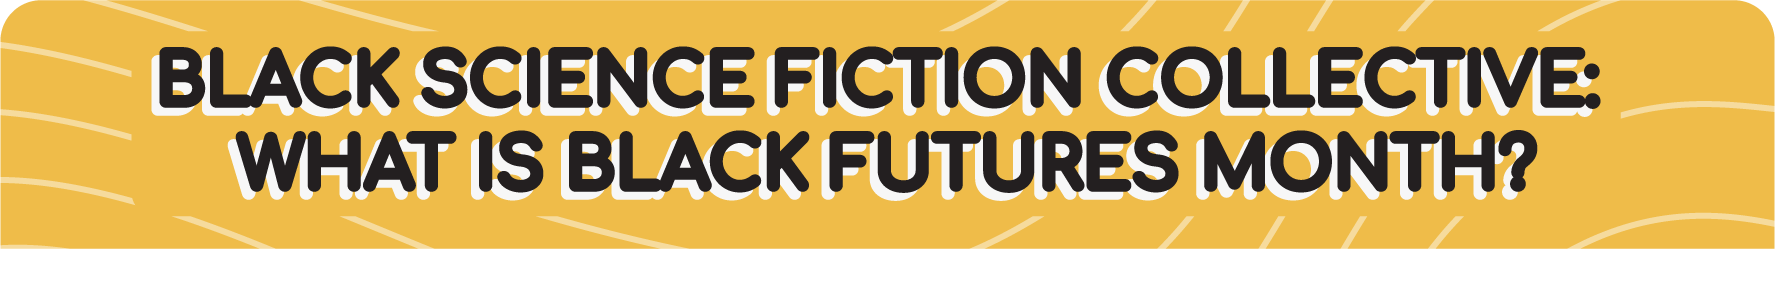 BLACK SCIENCE FICTION COLLECTIVE:  WHAT IS BLACK FUTURES MONTH?